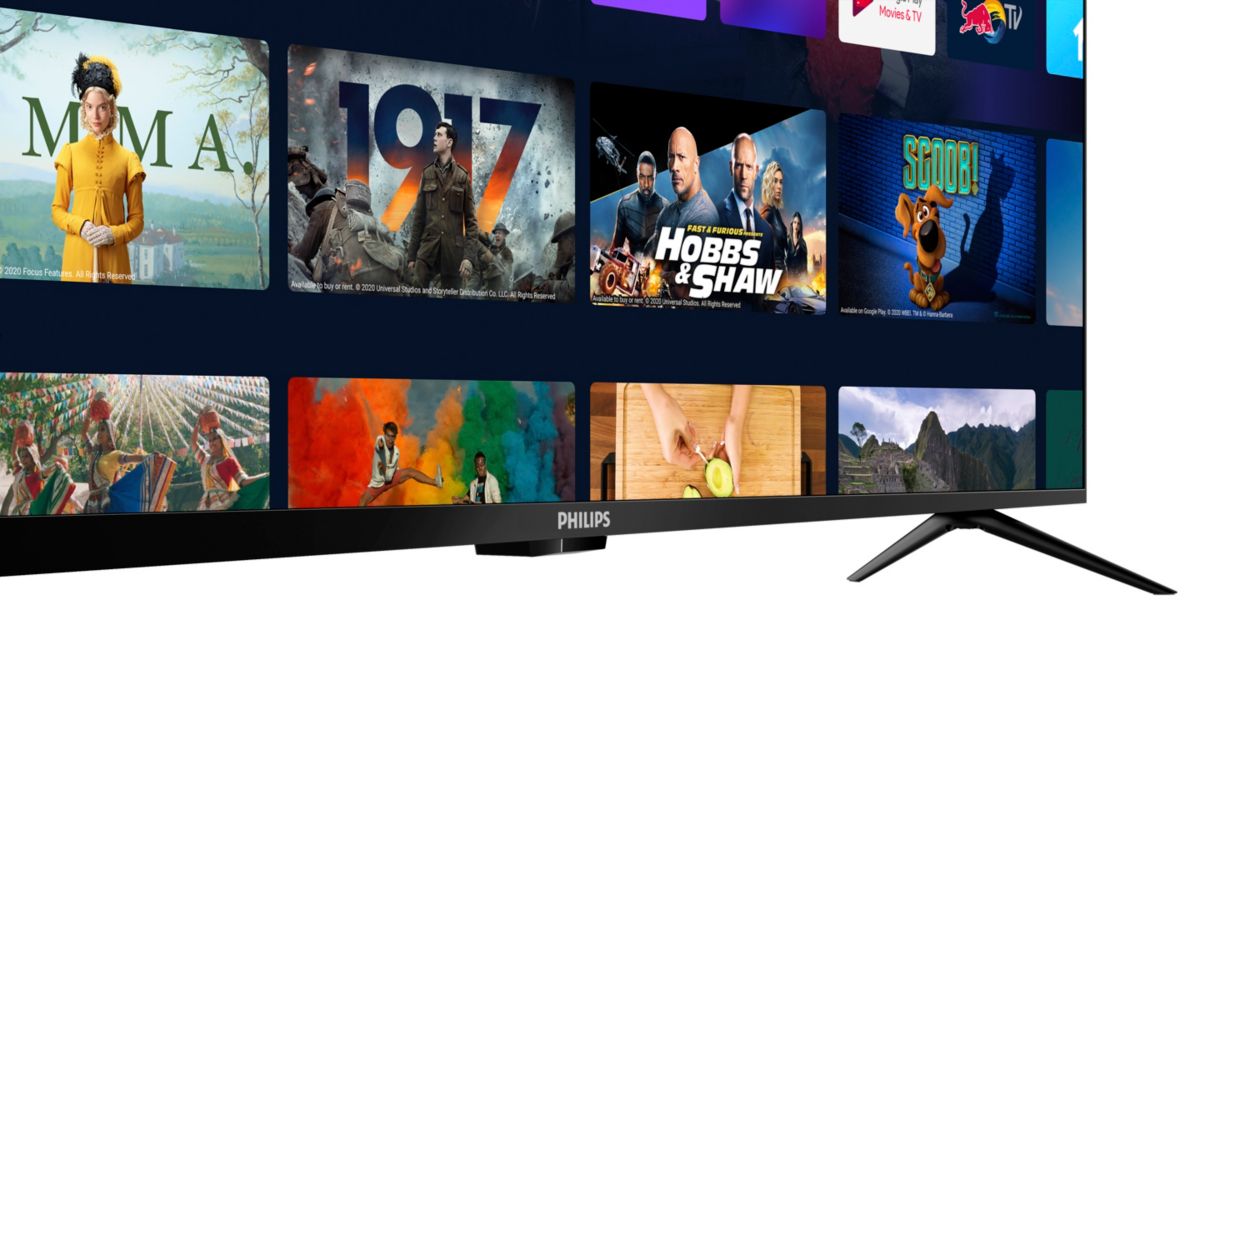 6000 series Android TV 24PFL6704/F7